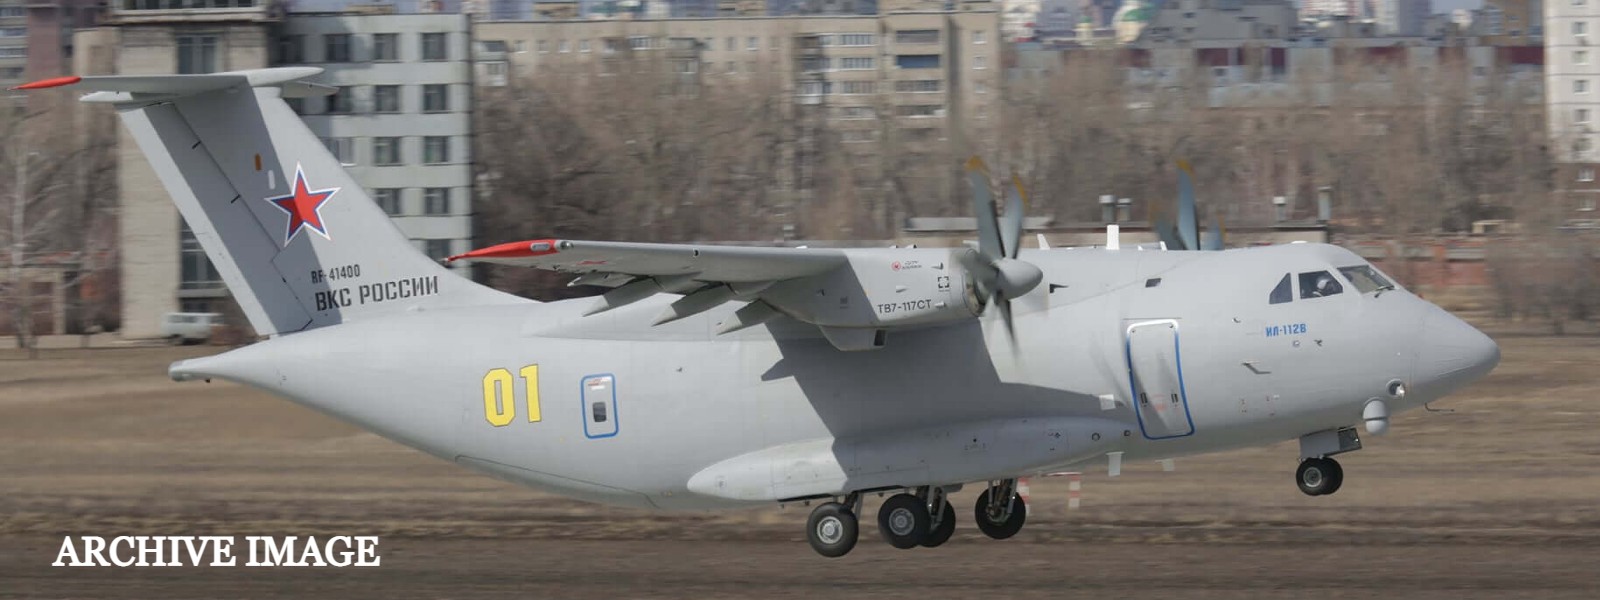 Prototype military transport aircraft crashes in R